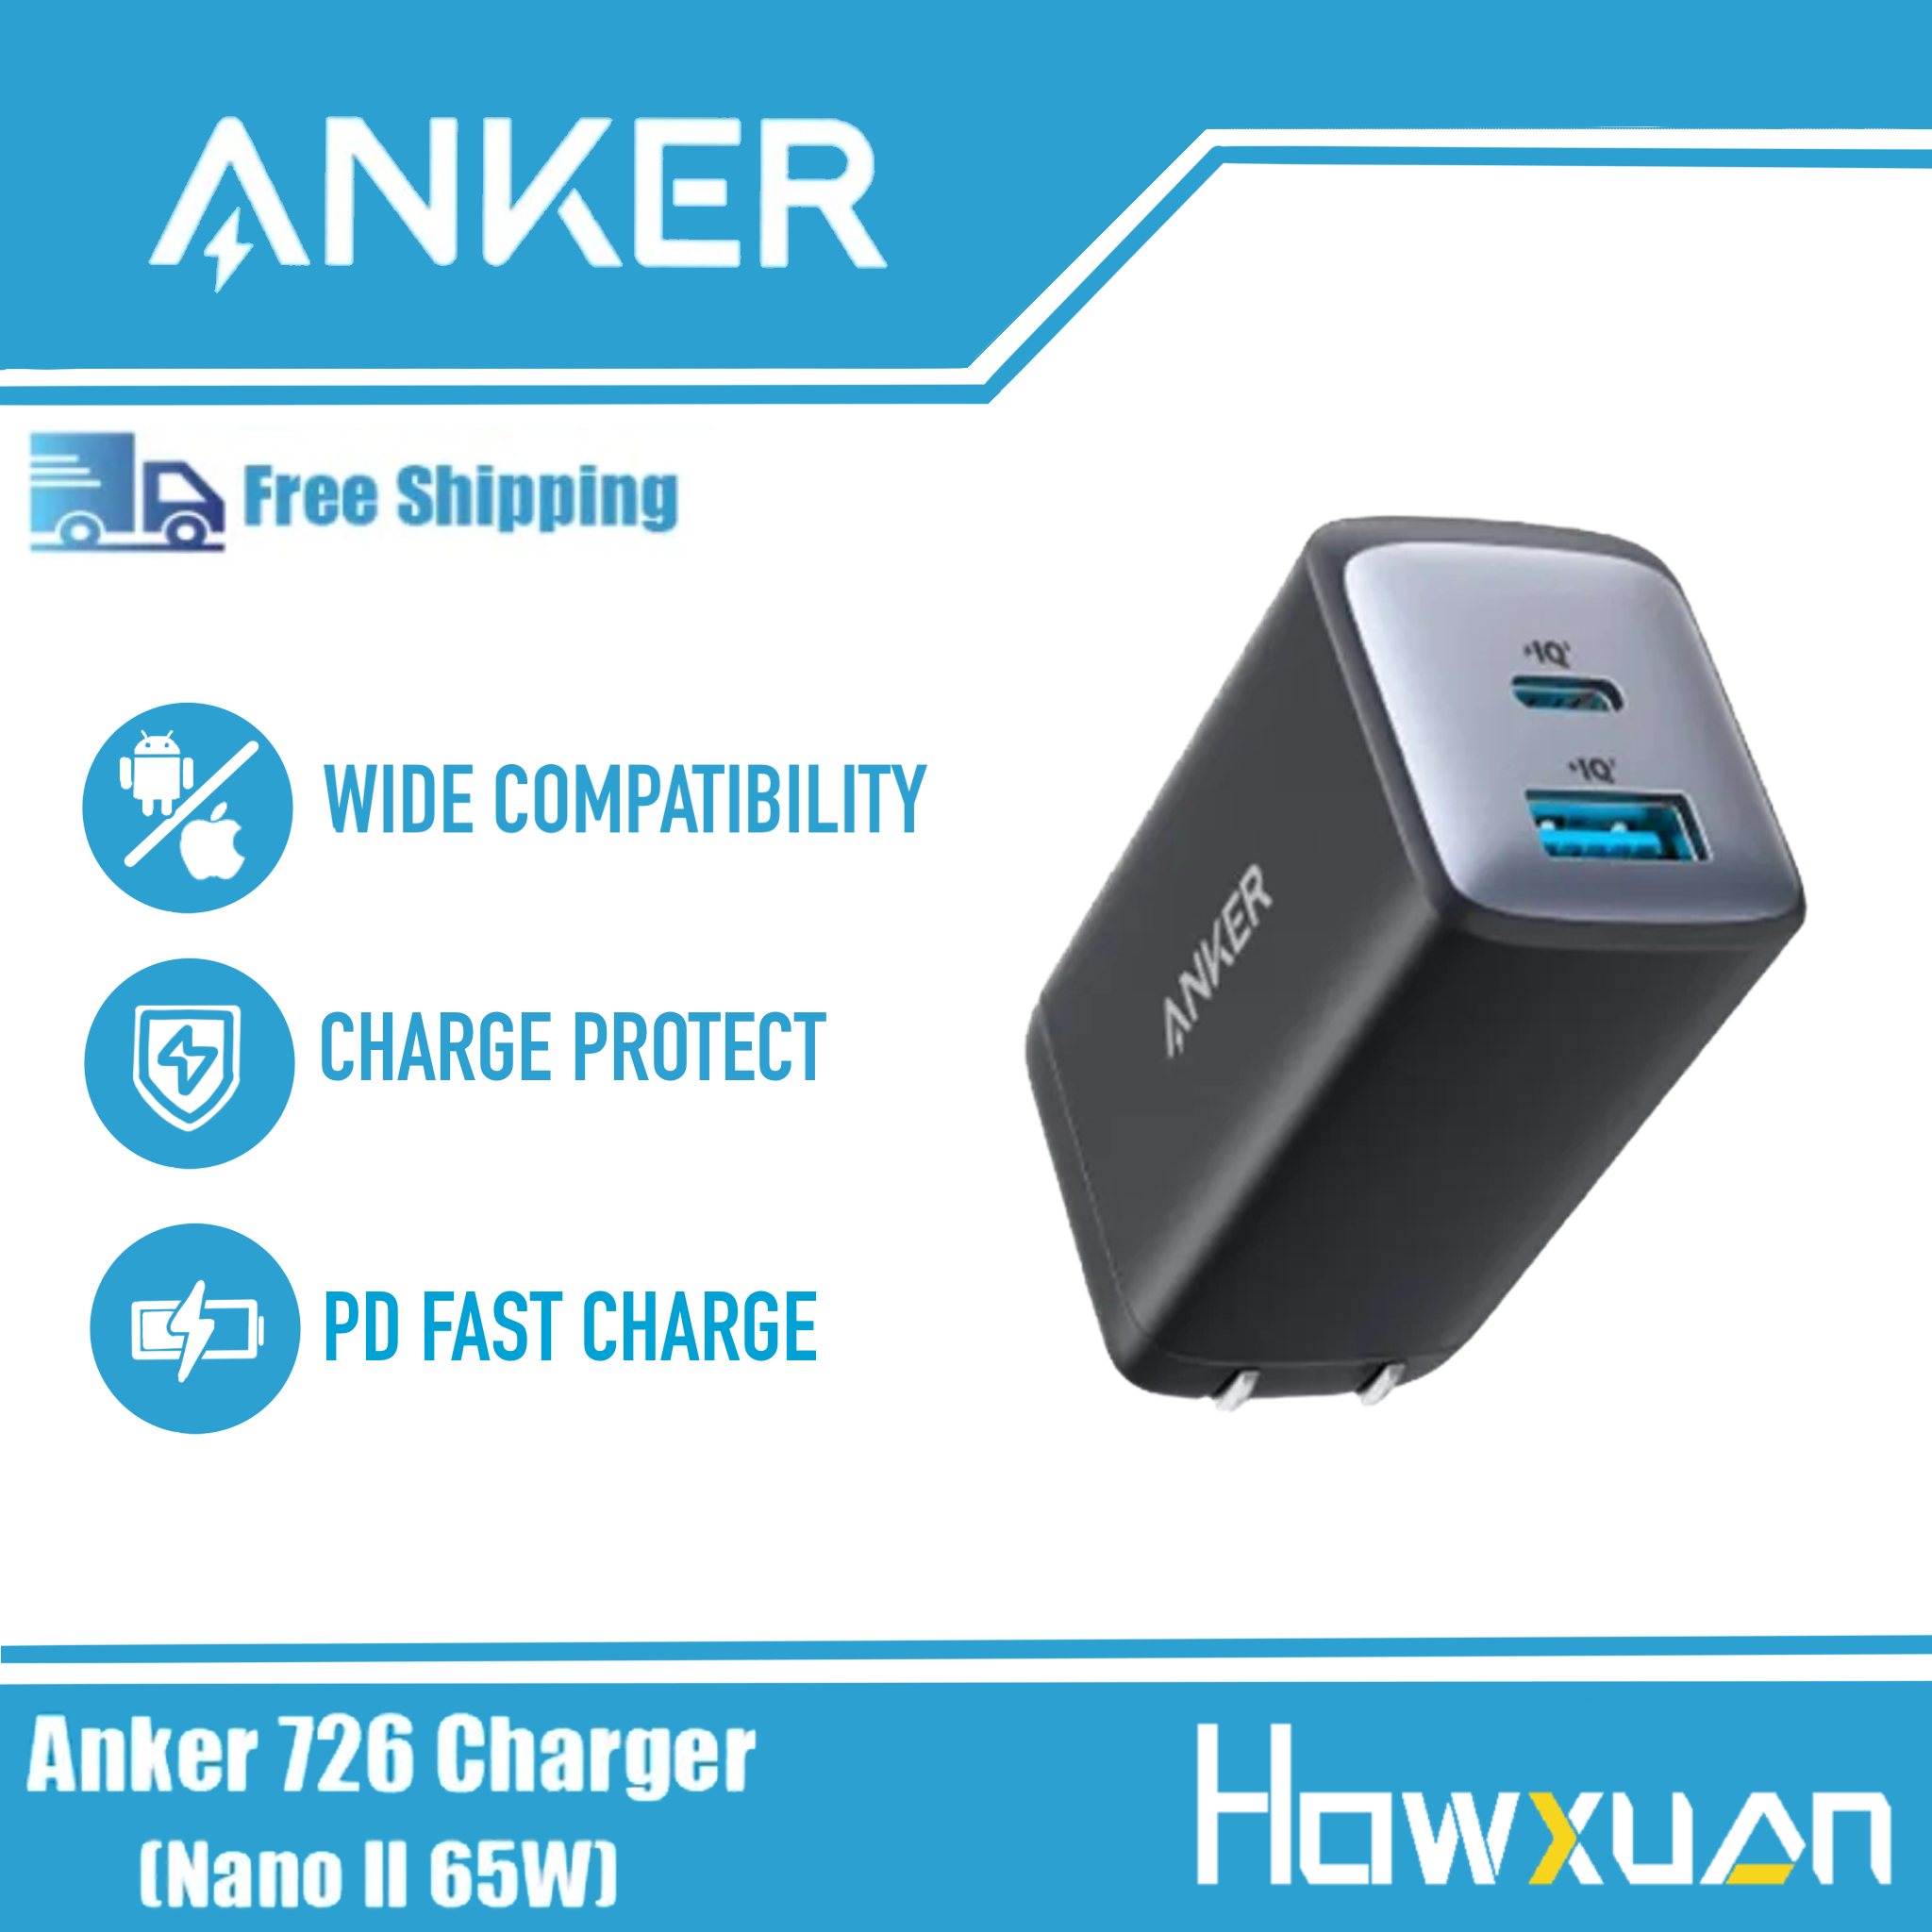 Anker USB C Charger, 726 ChargerPPS Fast Charger Adapter